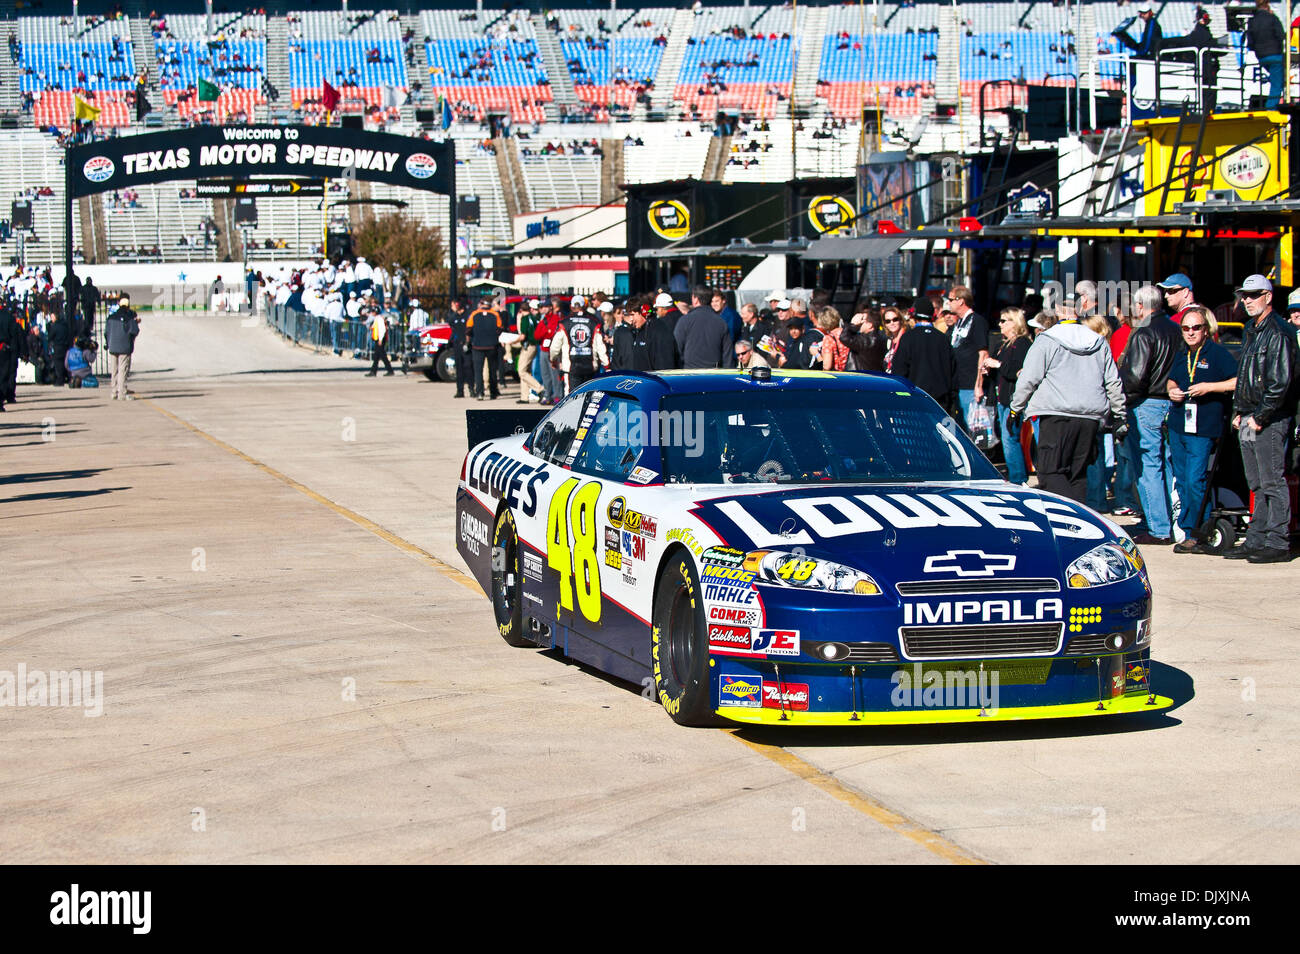 Nov. 6, 2010 - Fort Worth, Texas, United States of America - Sprint Cup Series driver Jimmie Johnson (48) heads into the TMS Garage before the AAA Texas 500 NASCAR Sprint Cup Series Race held in Fort Worth, Texas at the Texas Motor Speedway. (Credit Image: © Jerome Miron/Southcreek Global/ZUMApress.com) Stock Photo